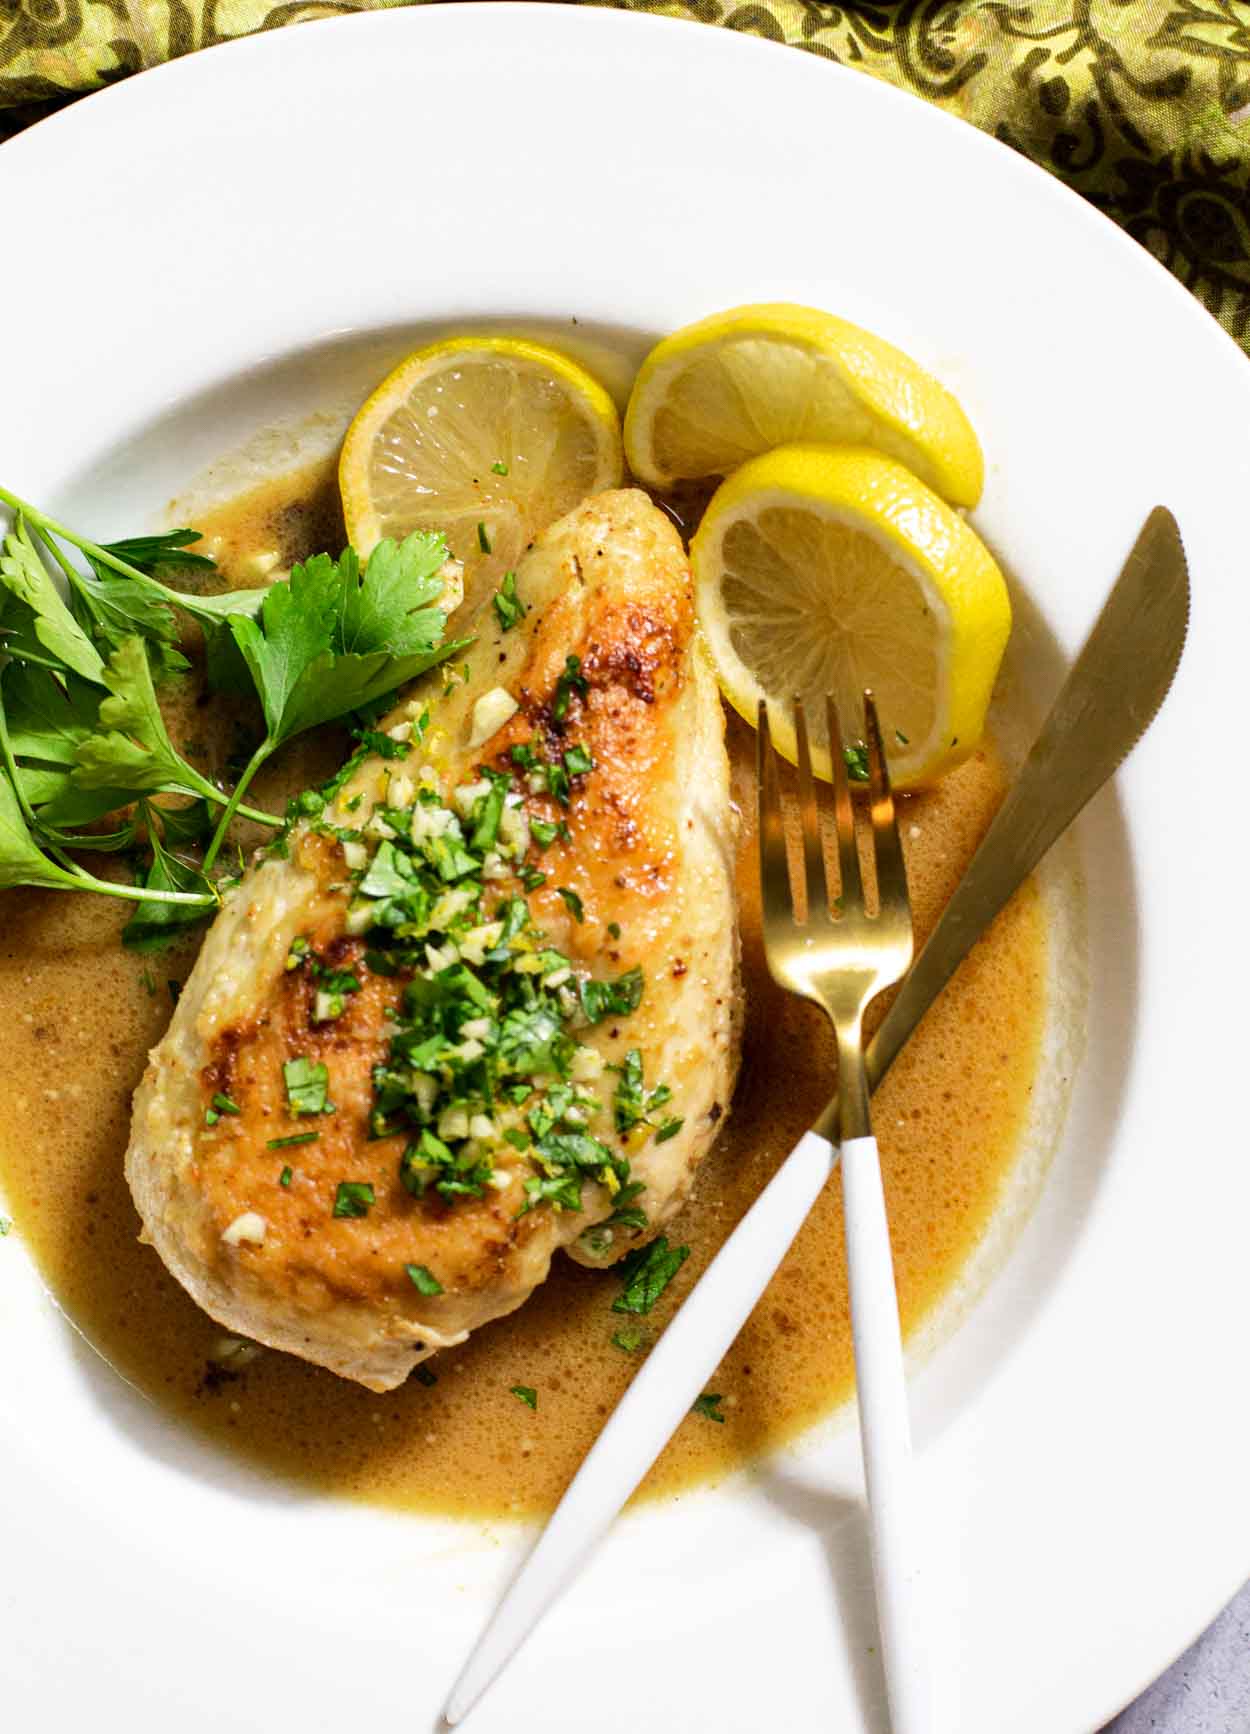 Sauteed chicken breast with a white wine sauce.